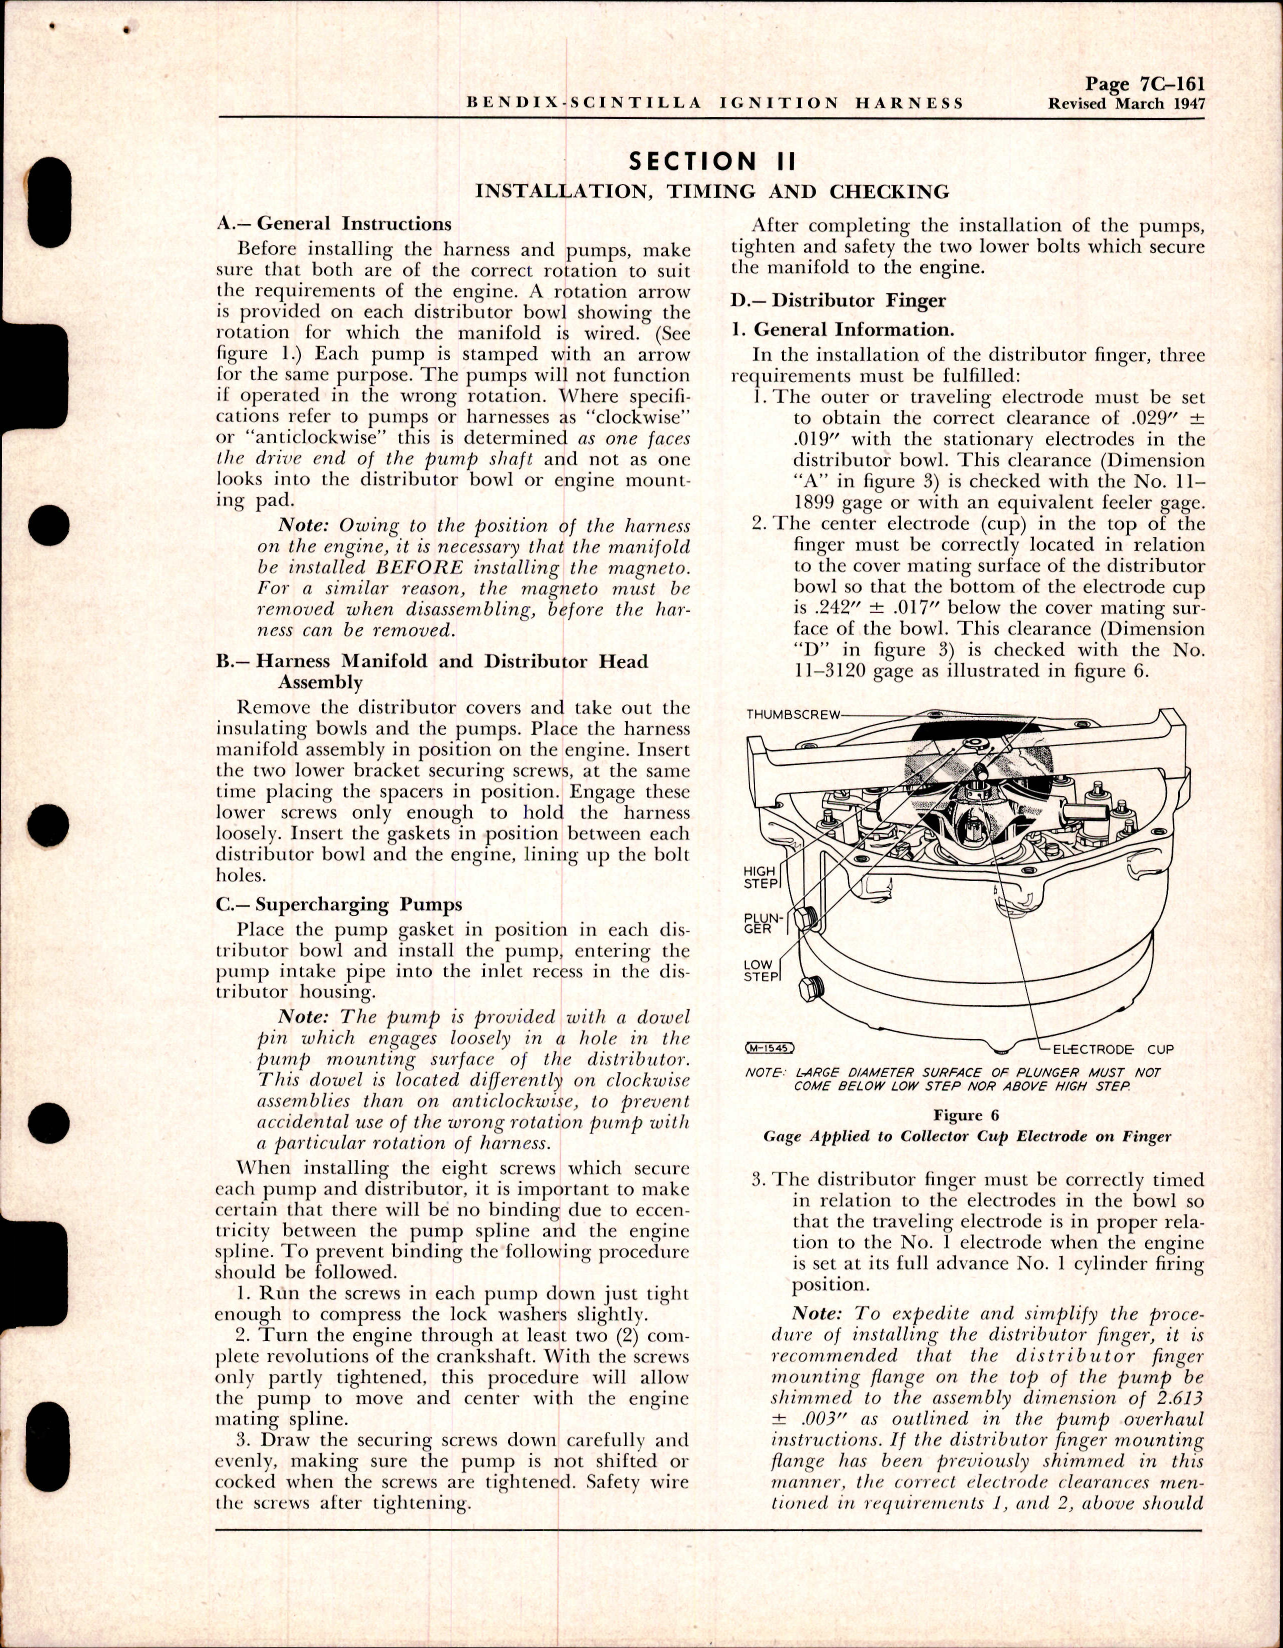 Sample page 7 from AirCorps Library document: Service Instructions for Bendix-Scintilla Cast, Filled Aircraft Ignition Harness